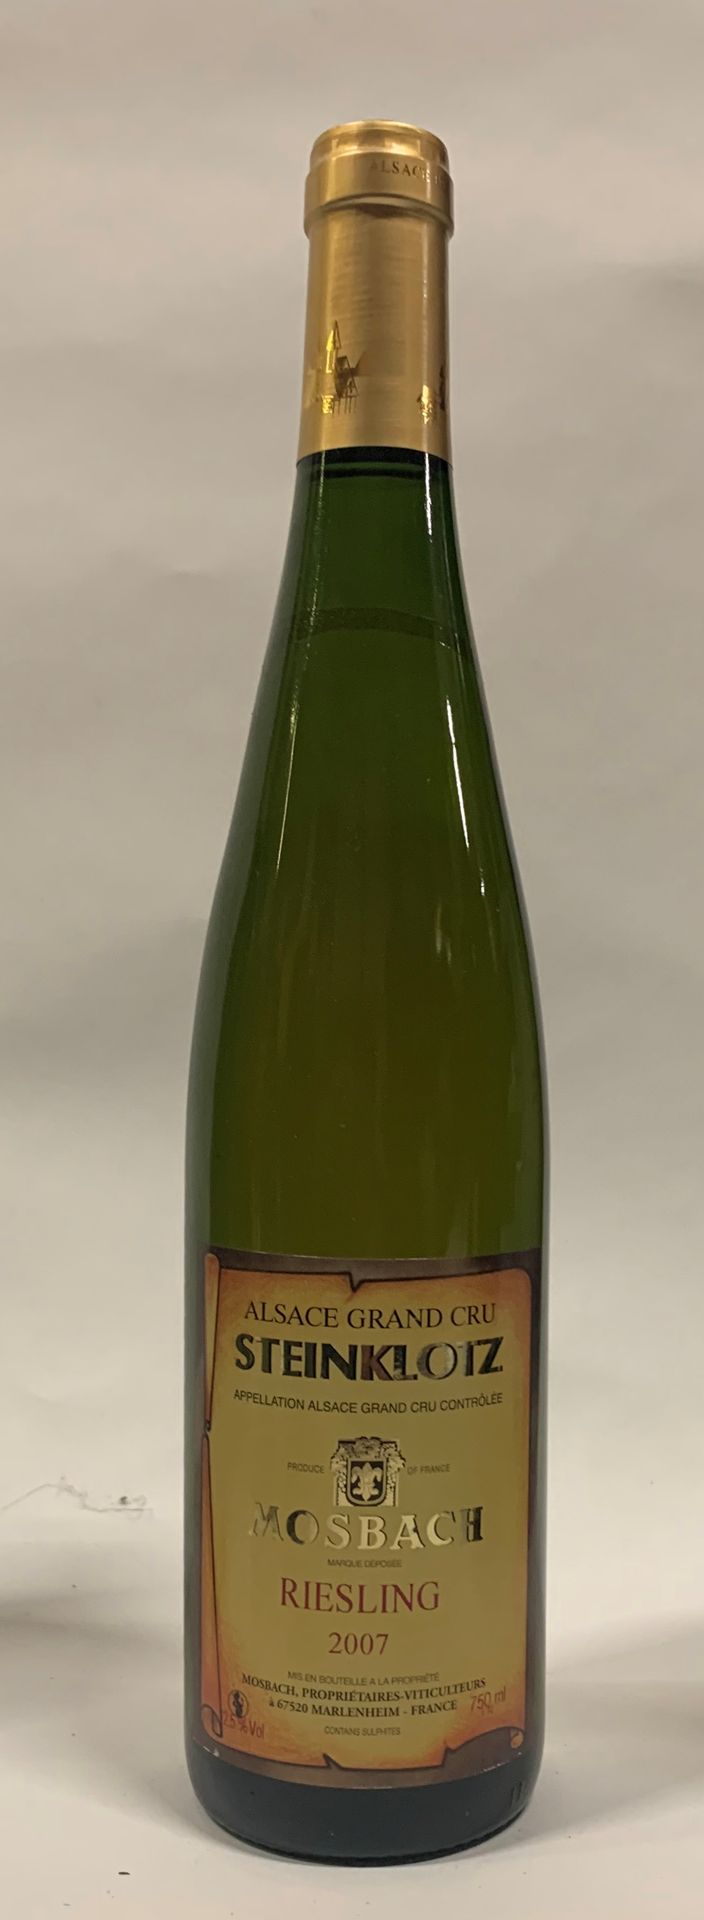 Null ○ RIESLING | GC Steinklotz, Domaine Mosbach, 2007

14 bouteilles (1B - ELS)&hellip;